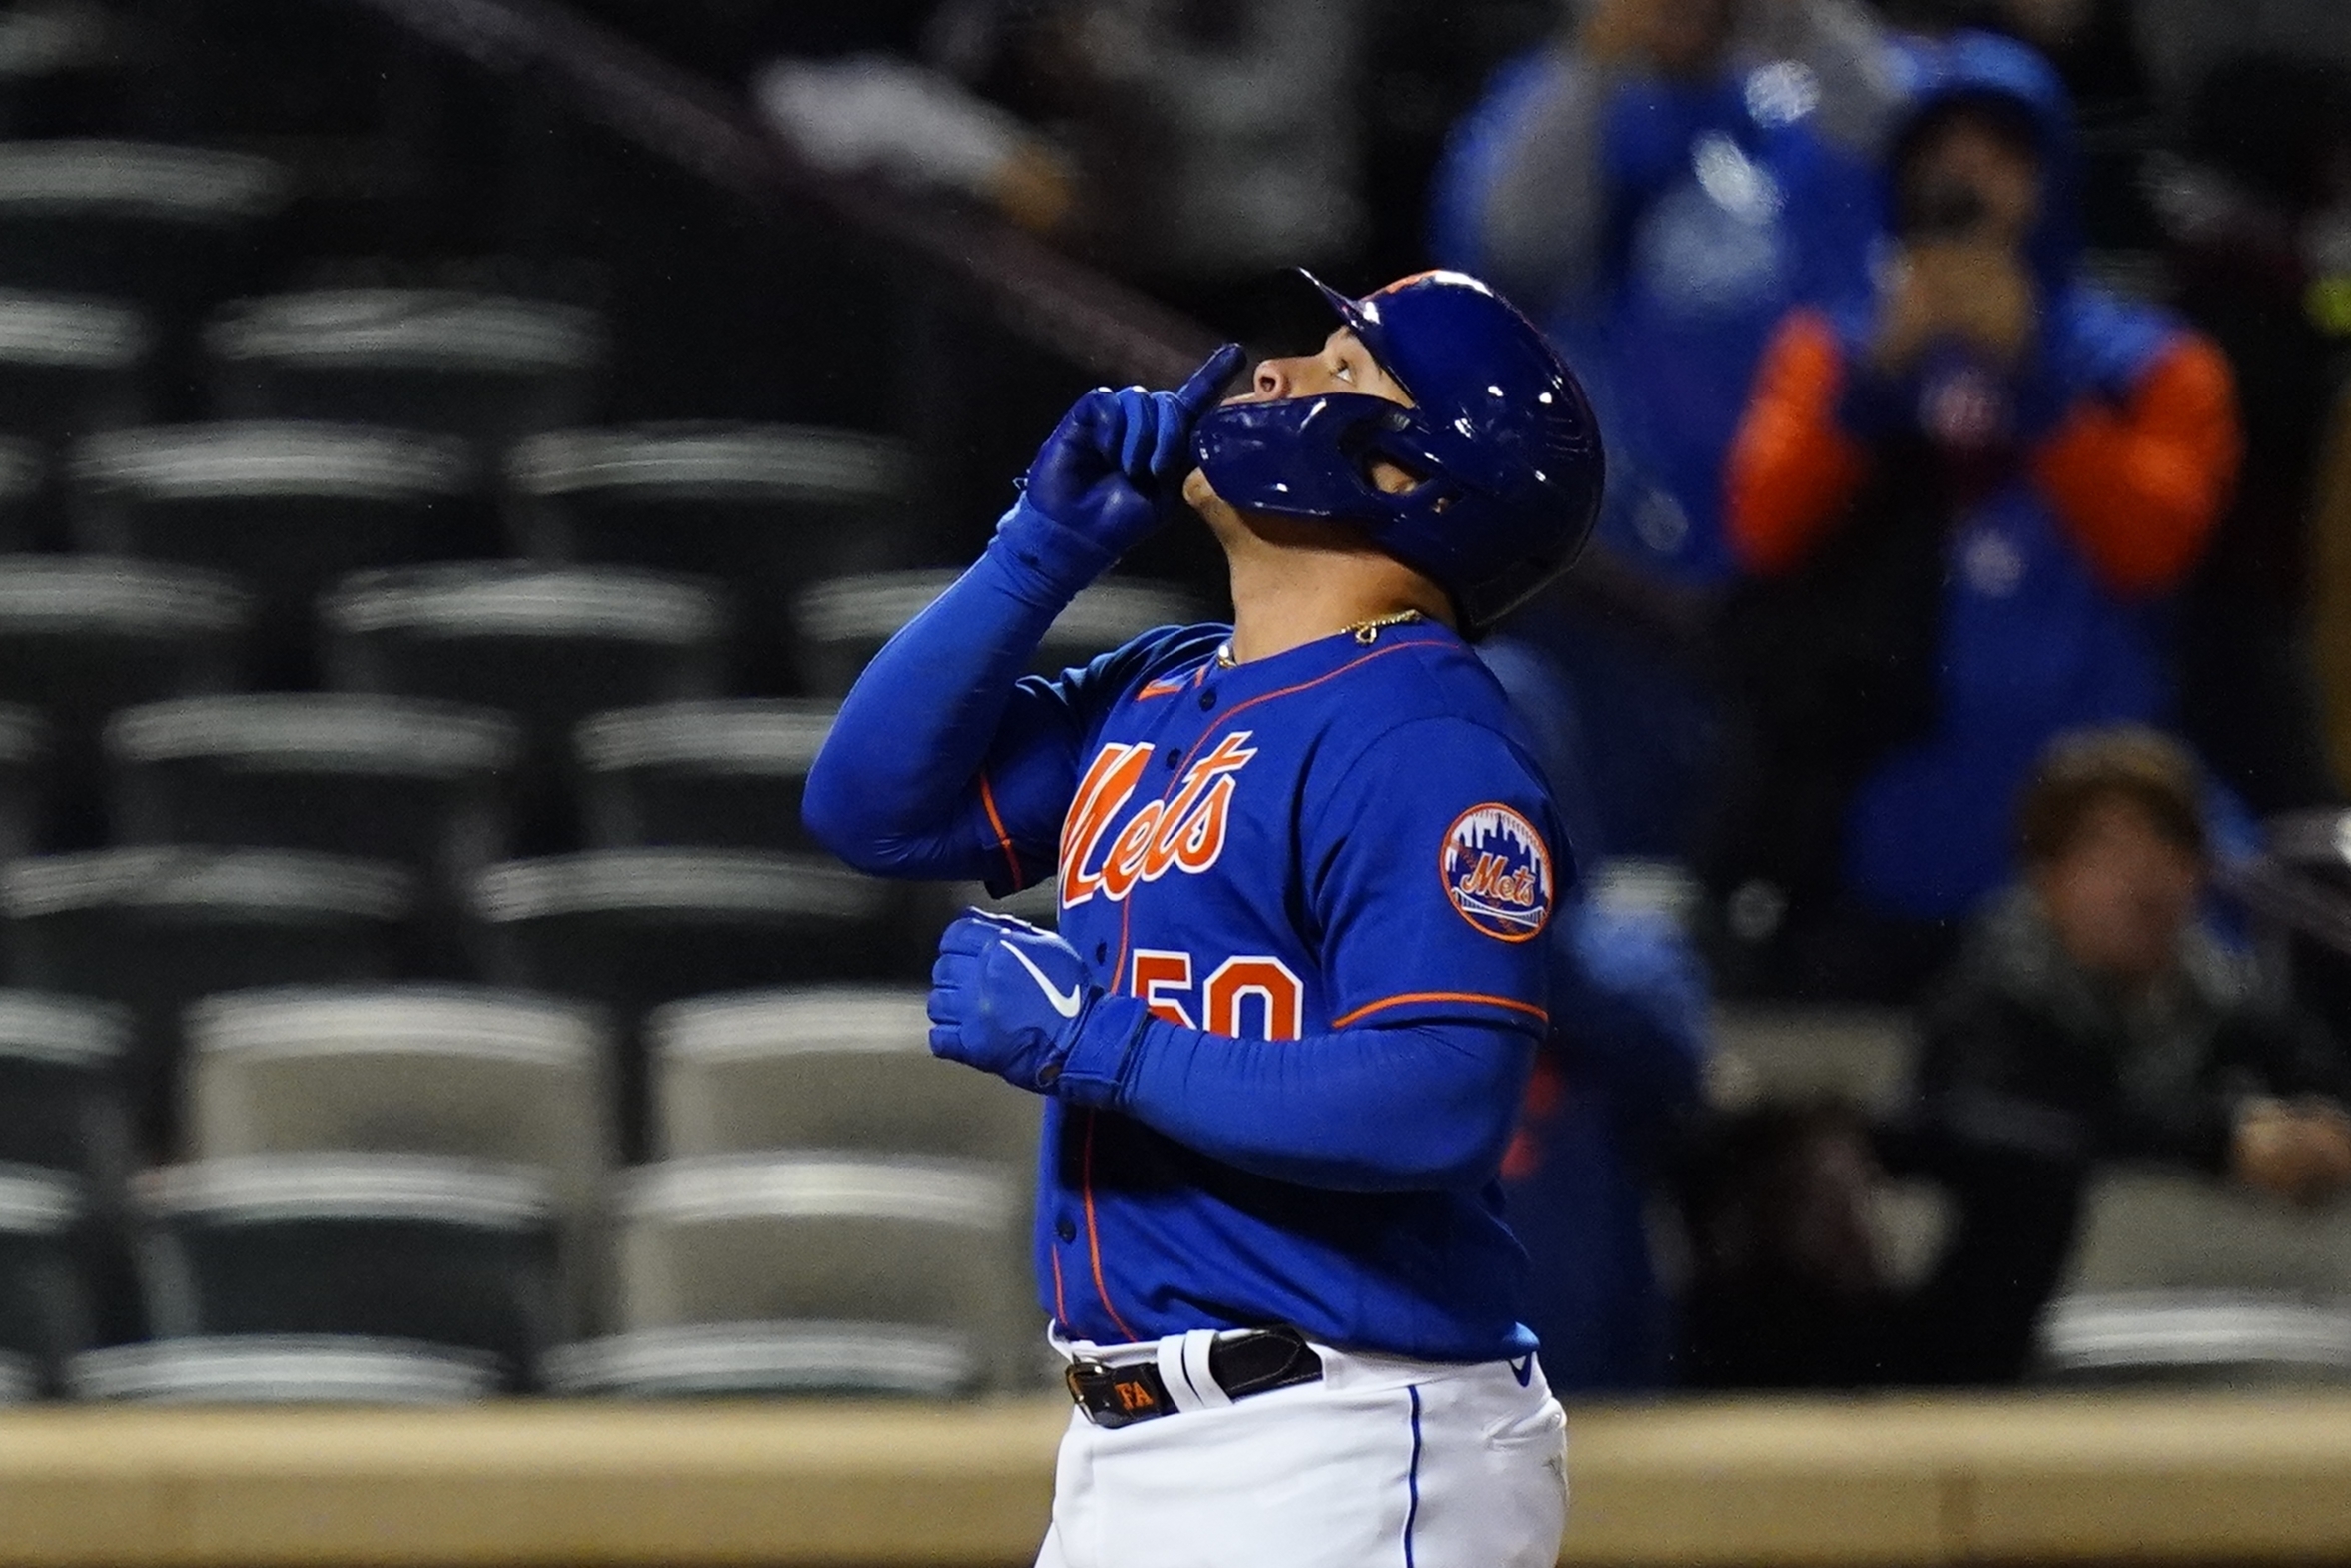 Giants' Michael Conforto doesn't regret how his Mets tenure ended